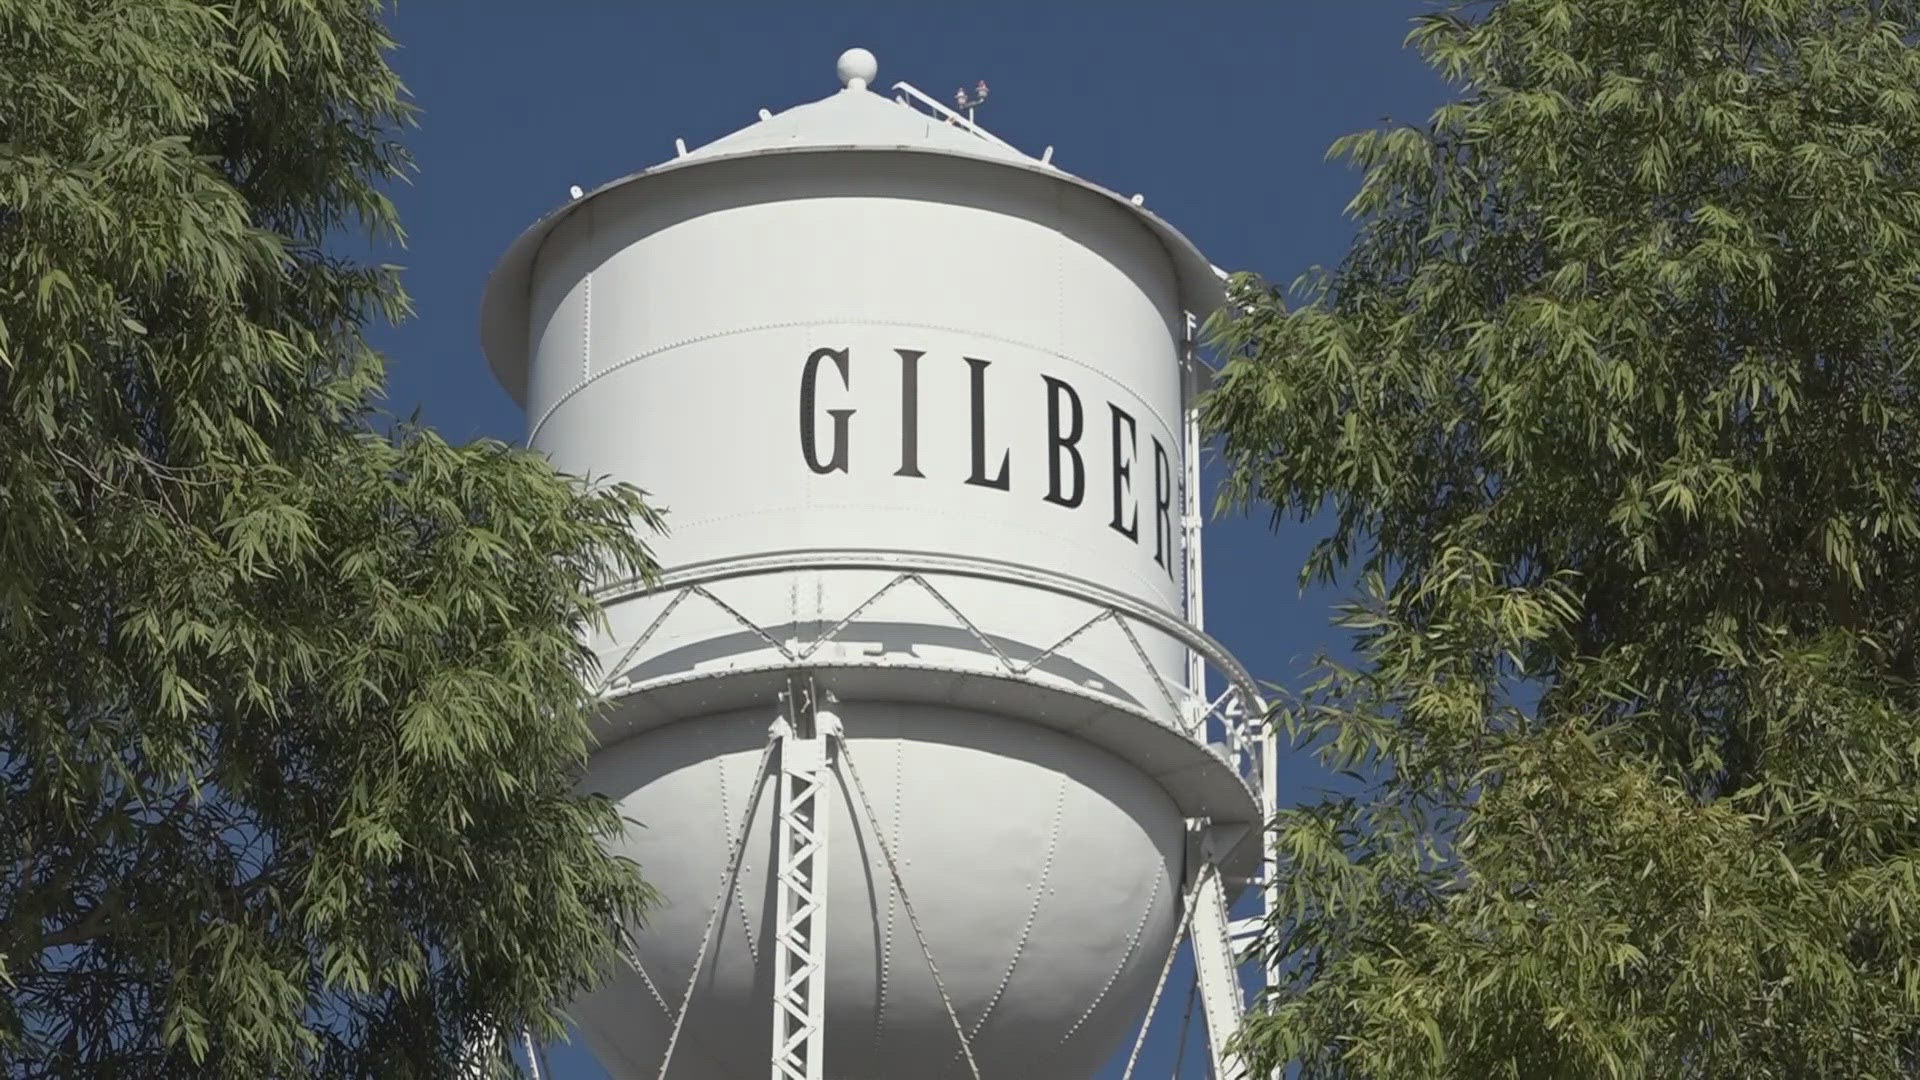 The Town of Gilbert just adopted a new ordinance that says anyone who has dead grass or debris in their front or backyard will be cited.